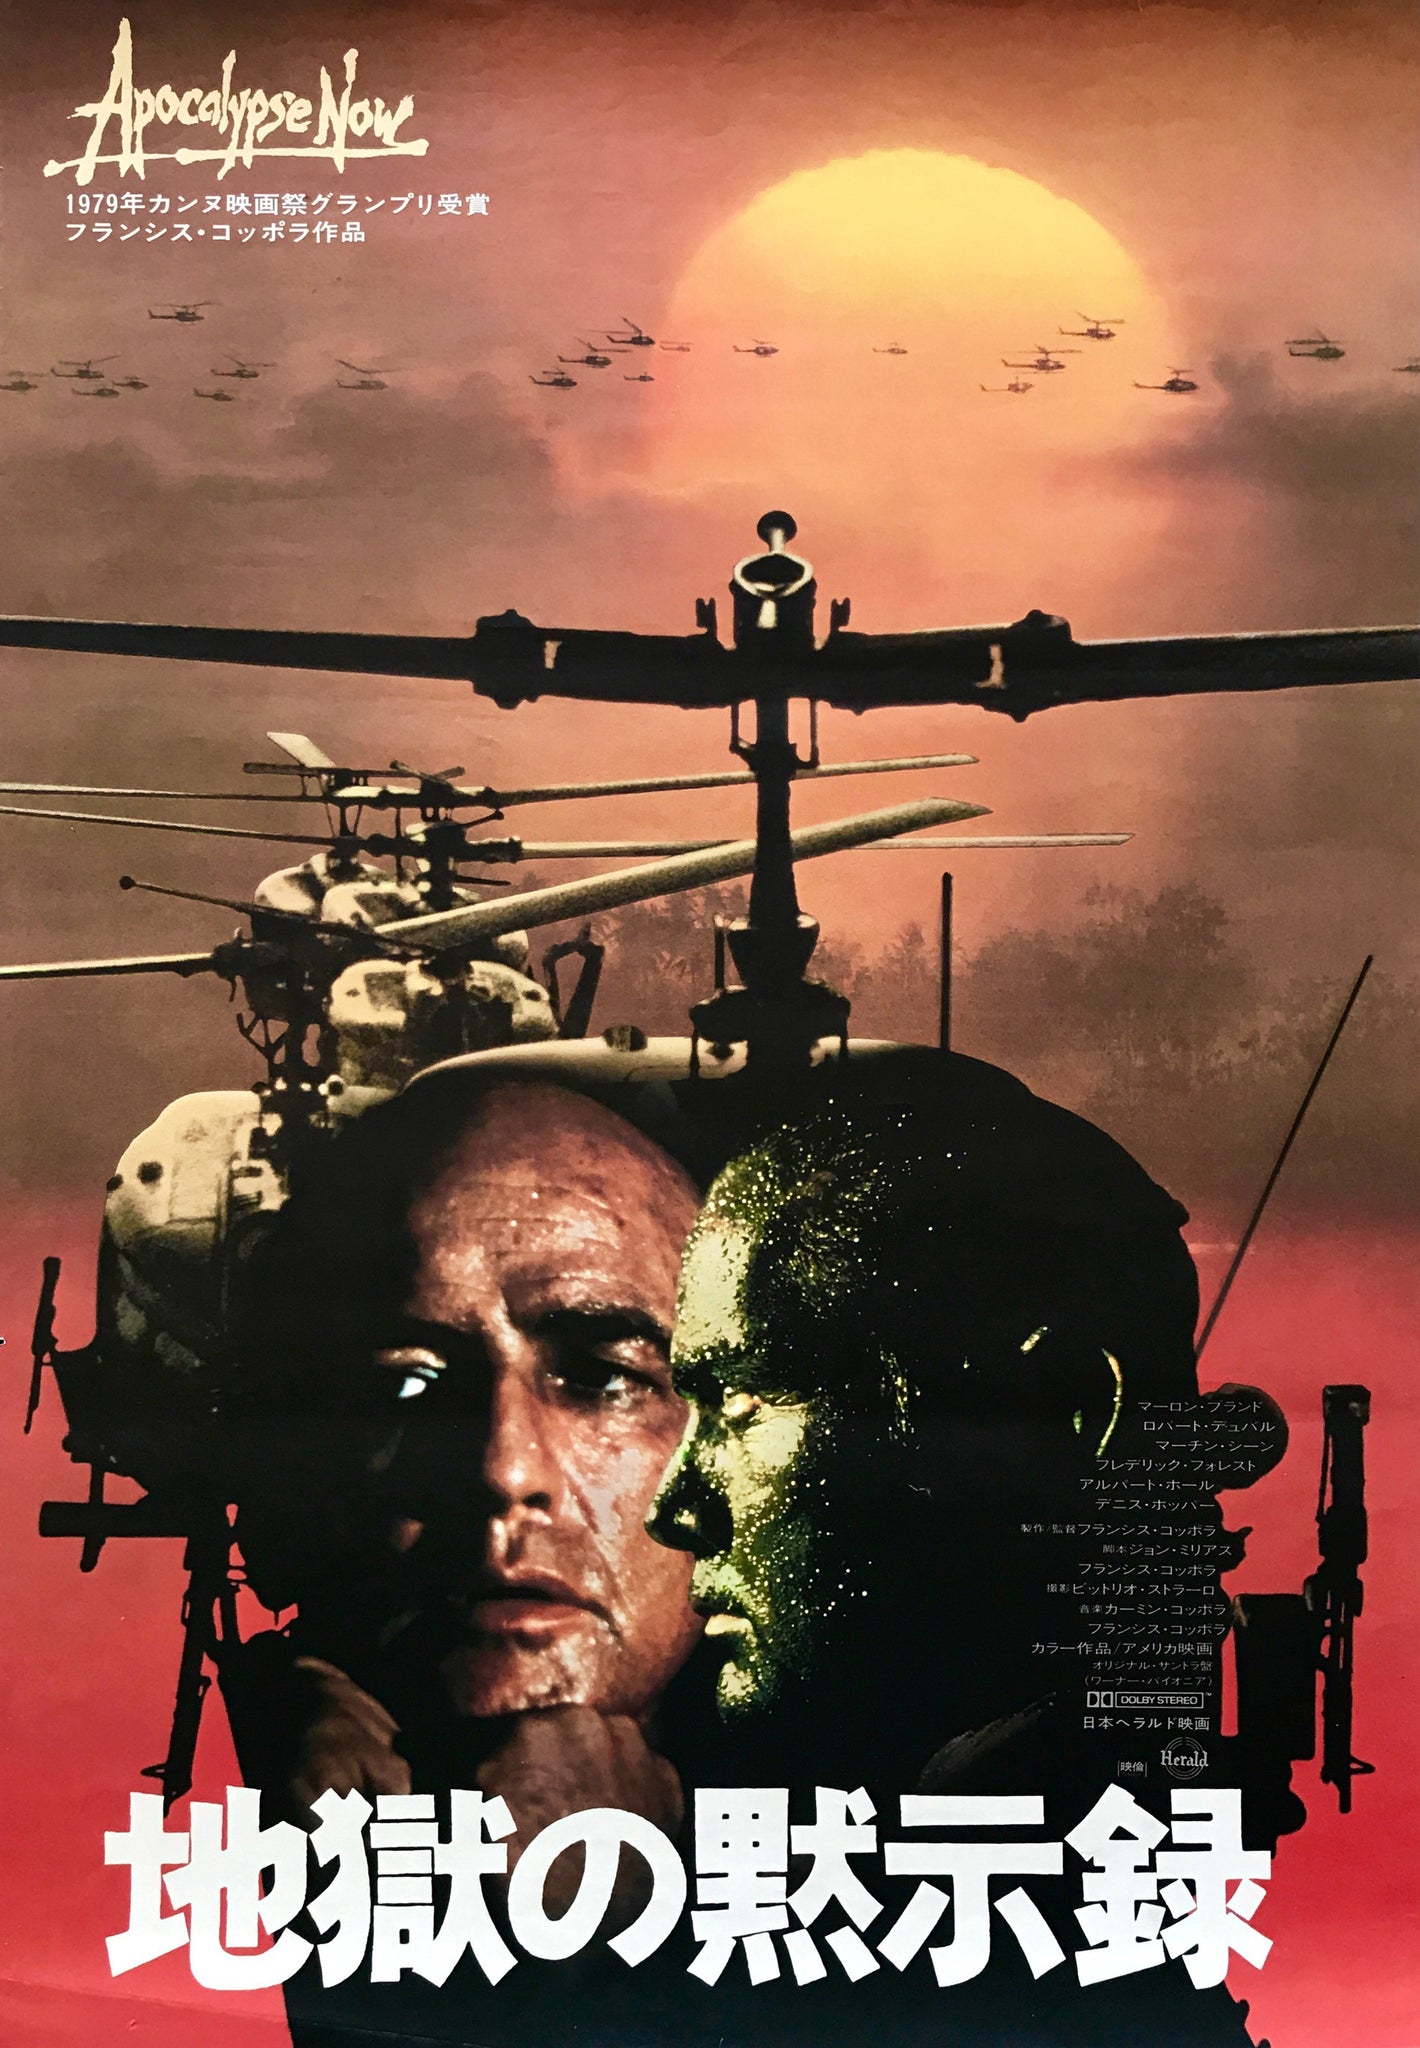 This is a replica film poster for the 1979 American war movie, Apocalypse Now directed, produced and co-written by Francis Ford Coppola. It was originally produced for the film's Japanese release and has gone on to become one of the more iconic film posters of all time.